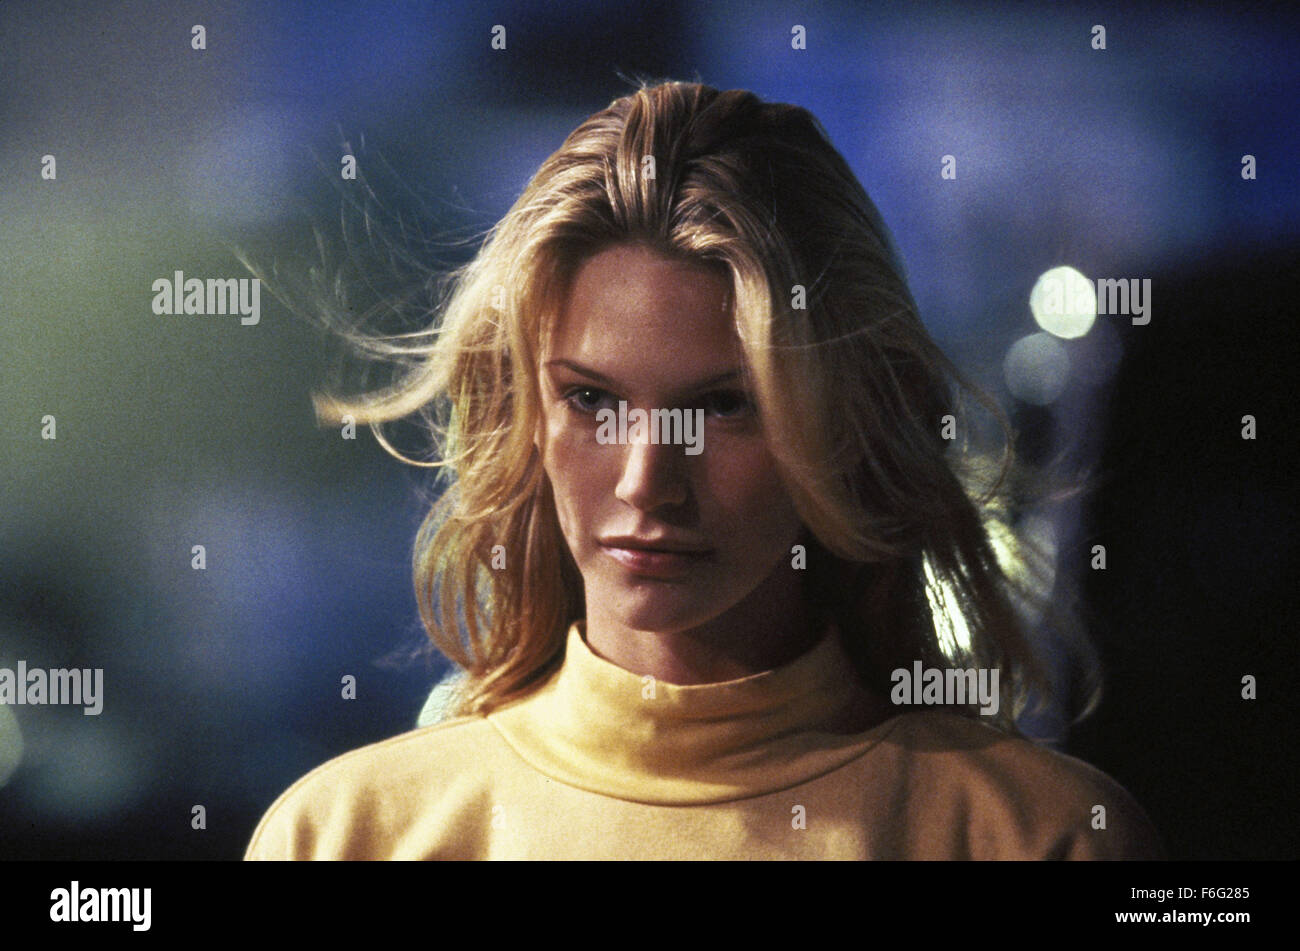 Jul 07, 1995; Los Angeles, CA, USA; The ever so fine NATASHA HENSTRIDGE stars as Sil in the Roger Donaldson directed sci-fi thriller, 'Species.' Stock Photo